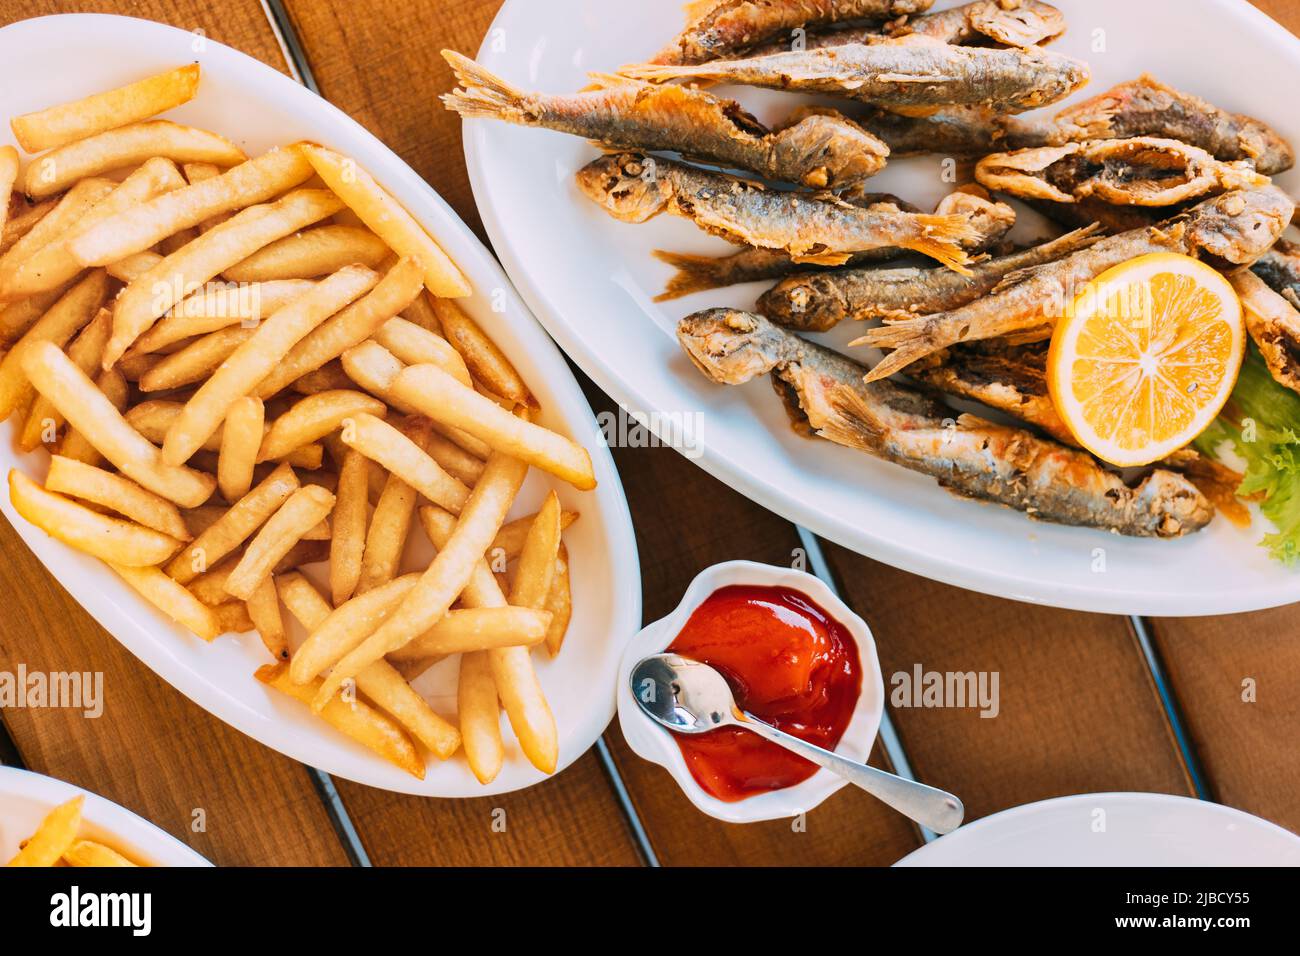 french fries and grilled fishes. fish and chips. Dish with Mullet Fish With orange. Fried fry small fishes Stock Photo